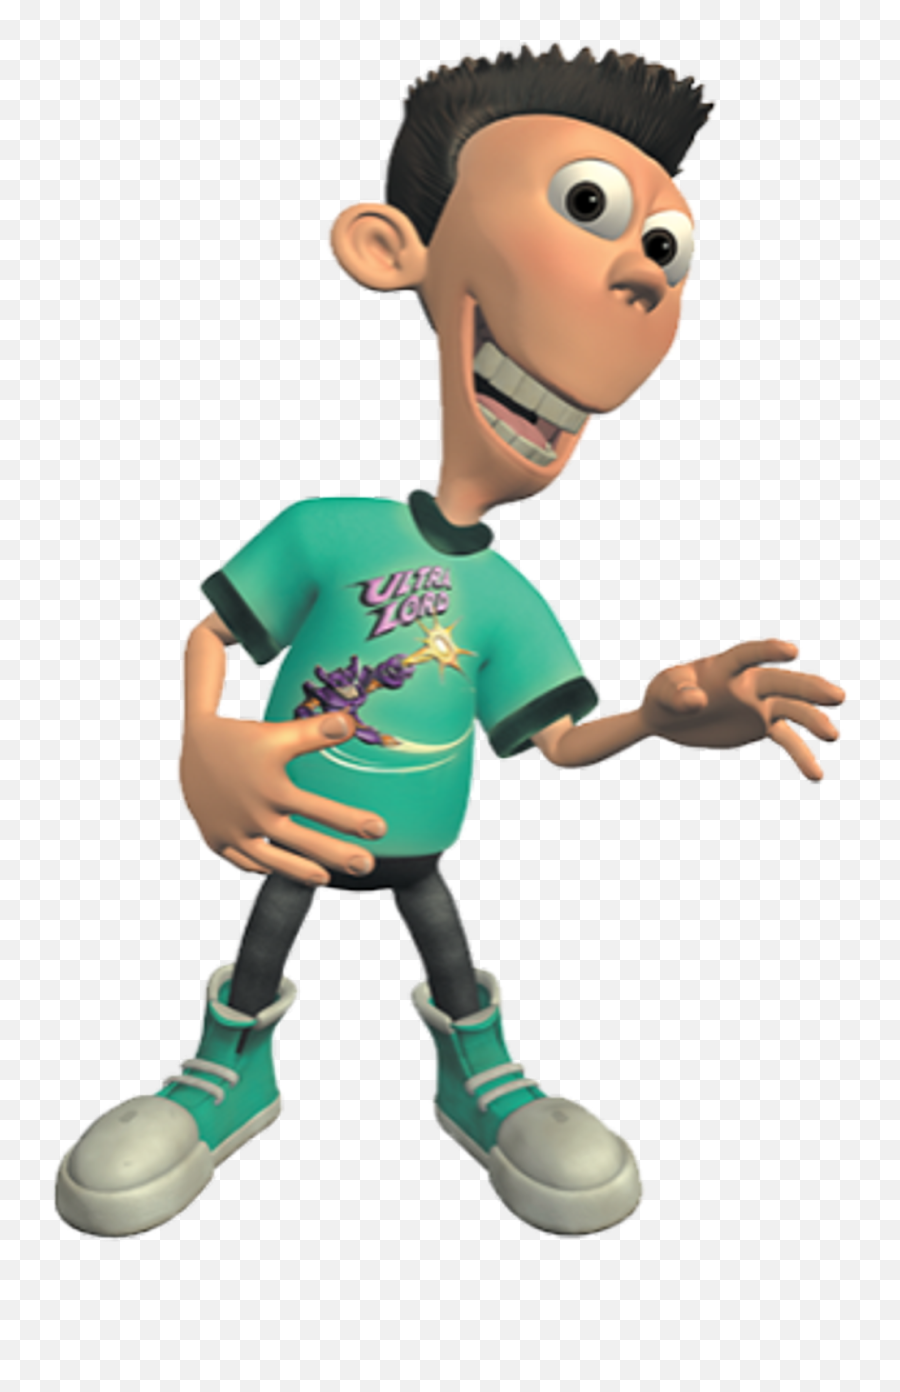 Kid From Jimmy Neutron Hd Png Download - Jimmy Neutron Sheen,Jimmy Neutron Png